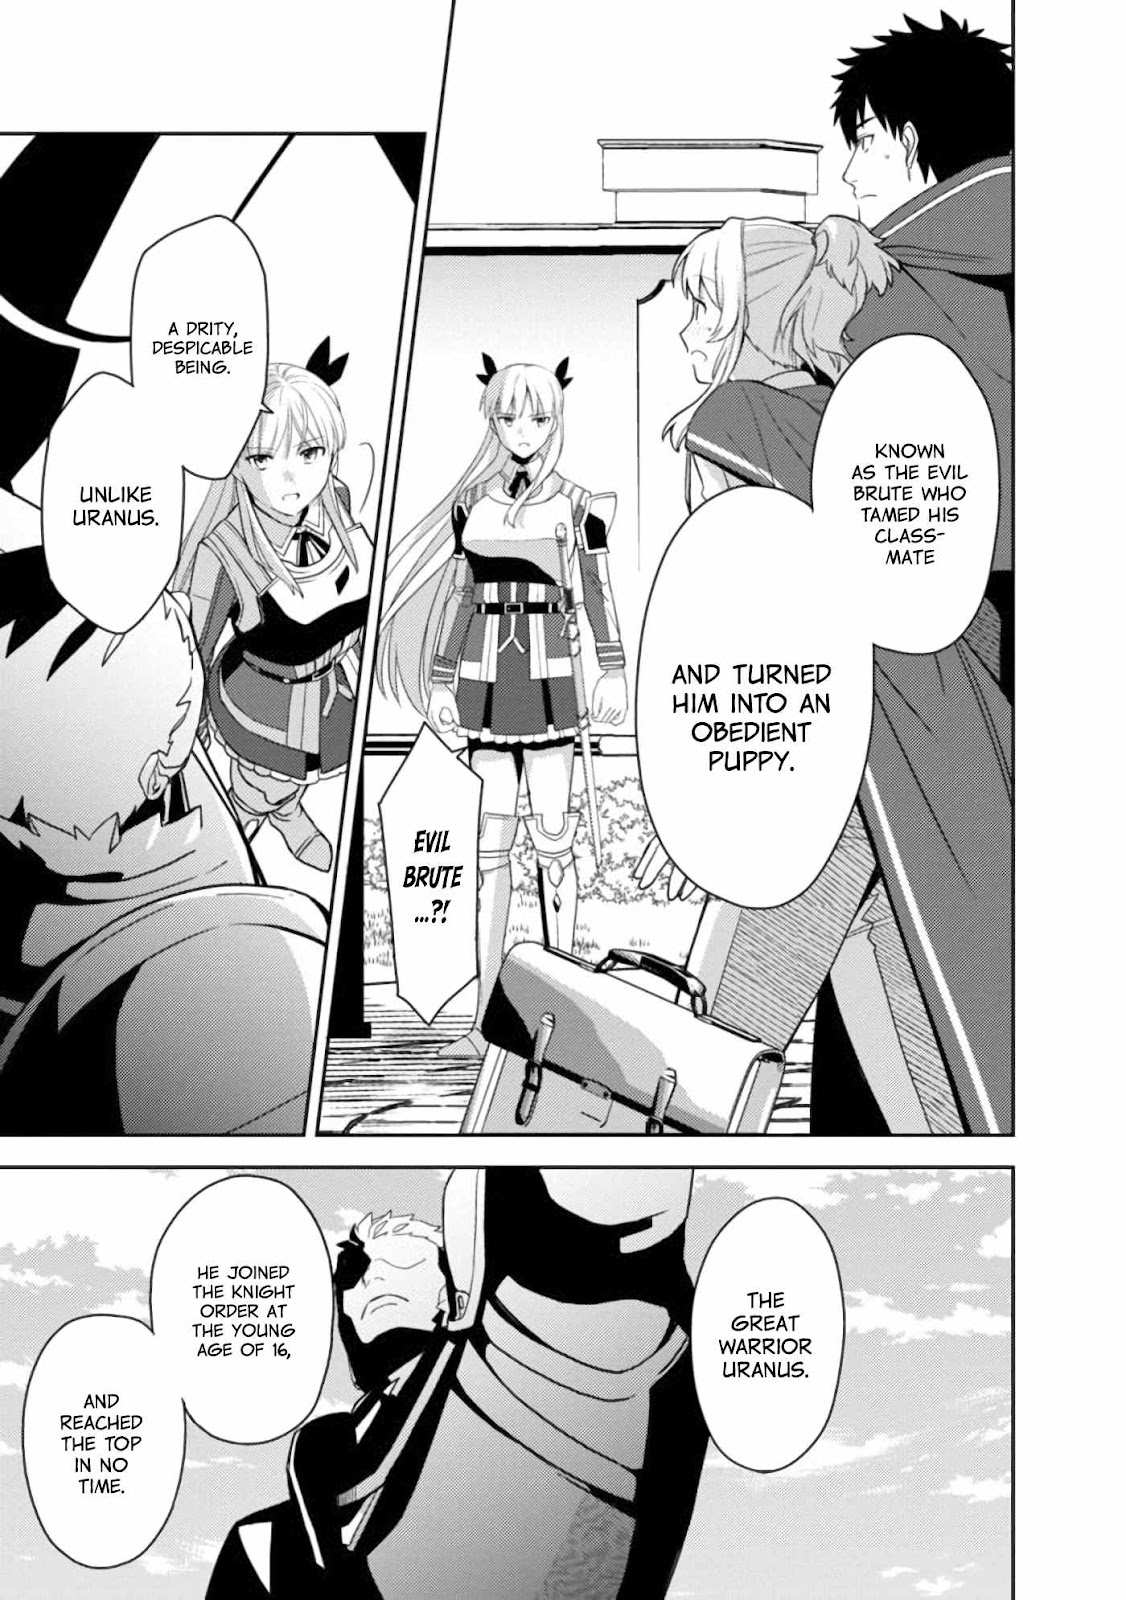 The Reincarnated Swordsman With 9999 Strength Wants To Become A Magician! Chapter 2 #36